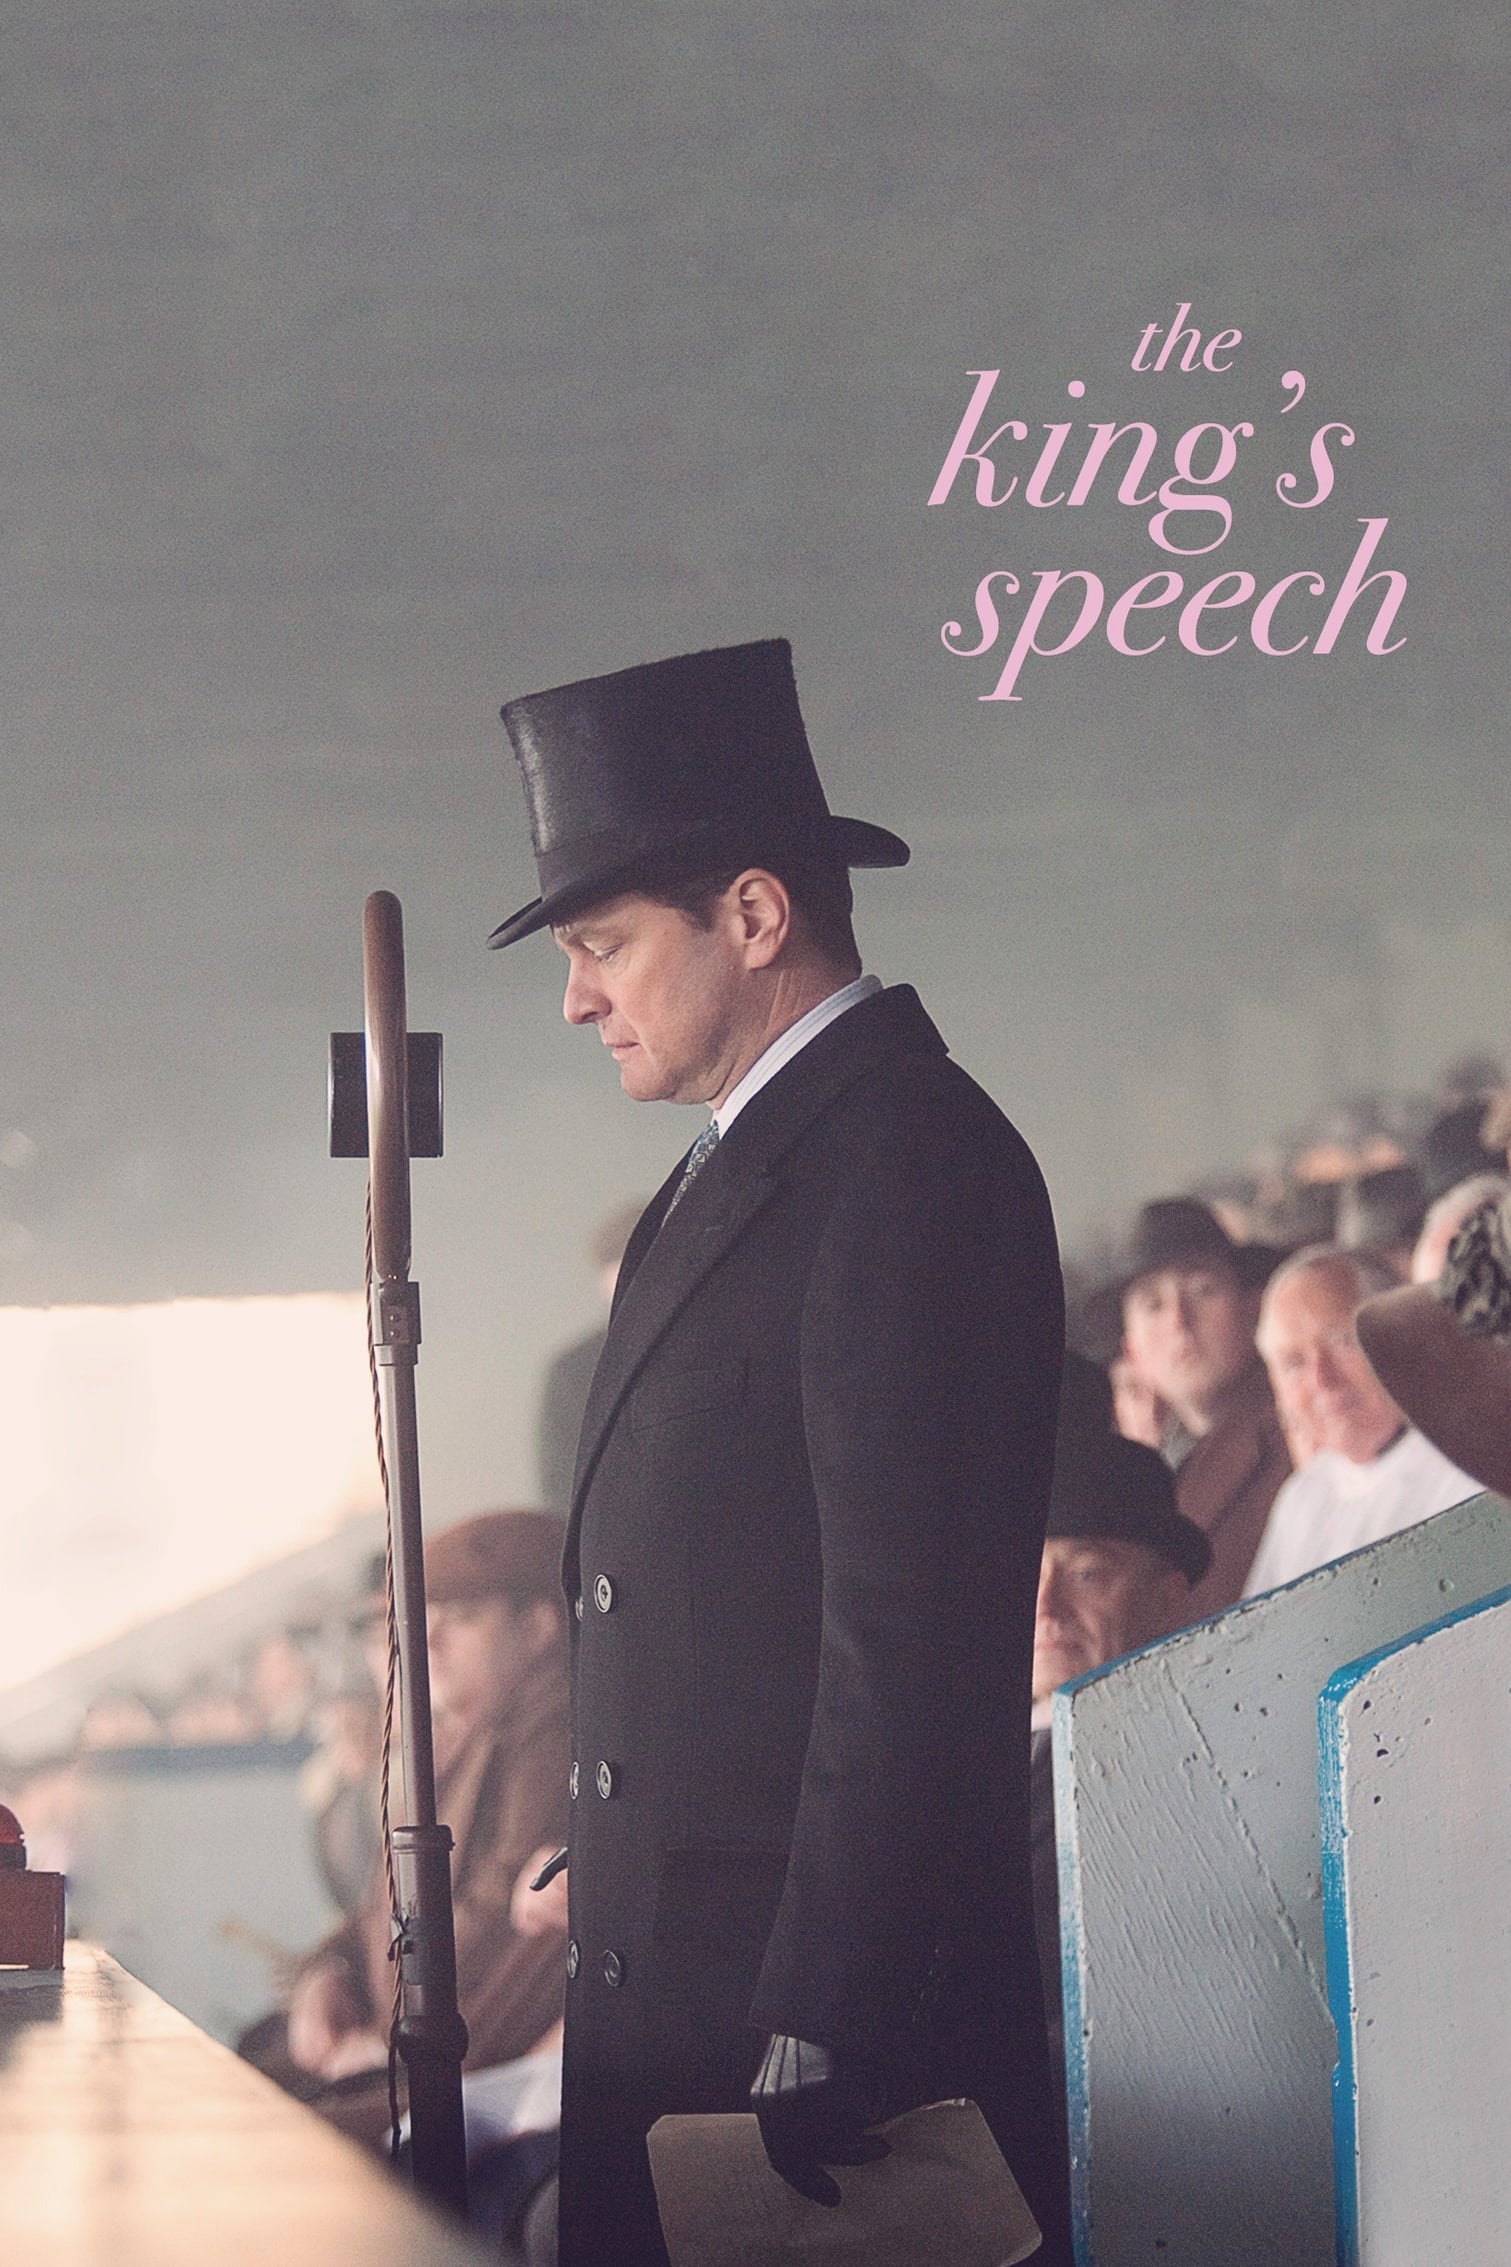 the king's speech how accurate